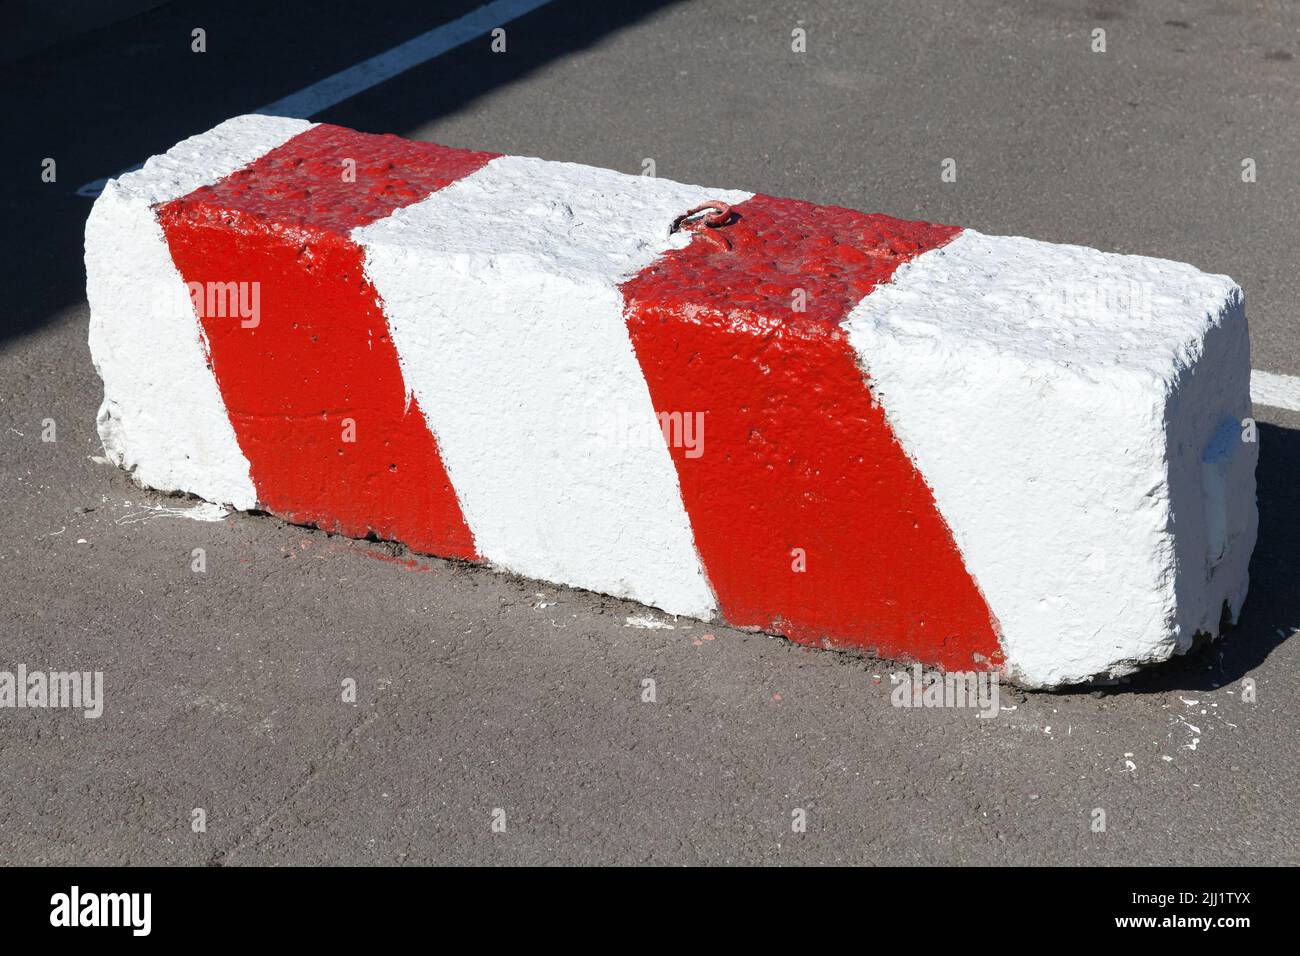 Concrete road block with warning red white diagonal striped pattern lays on an urban road Stock Photo